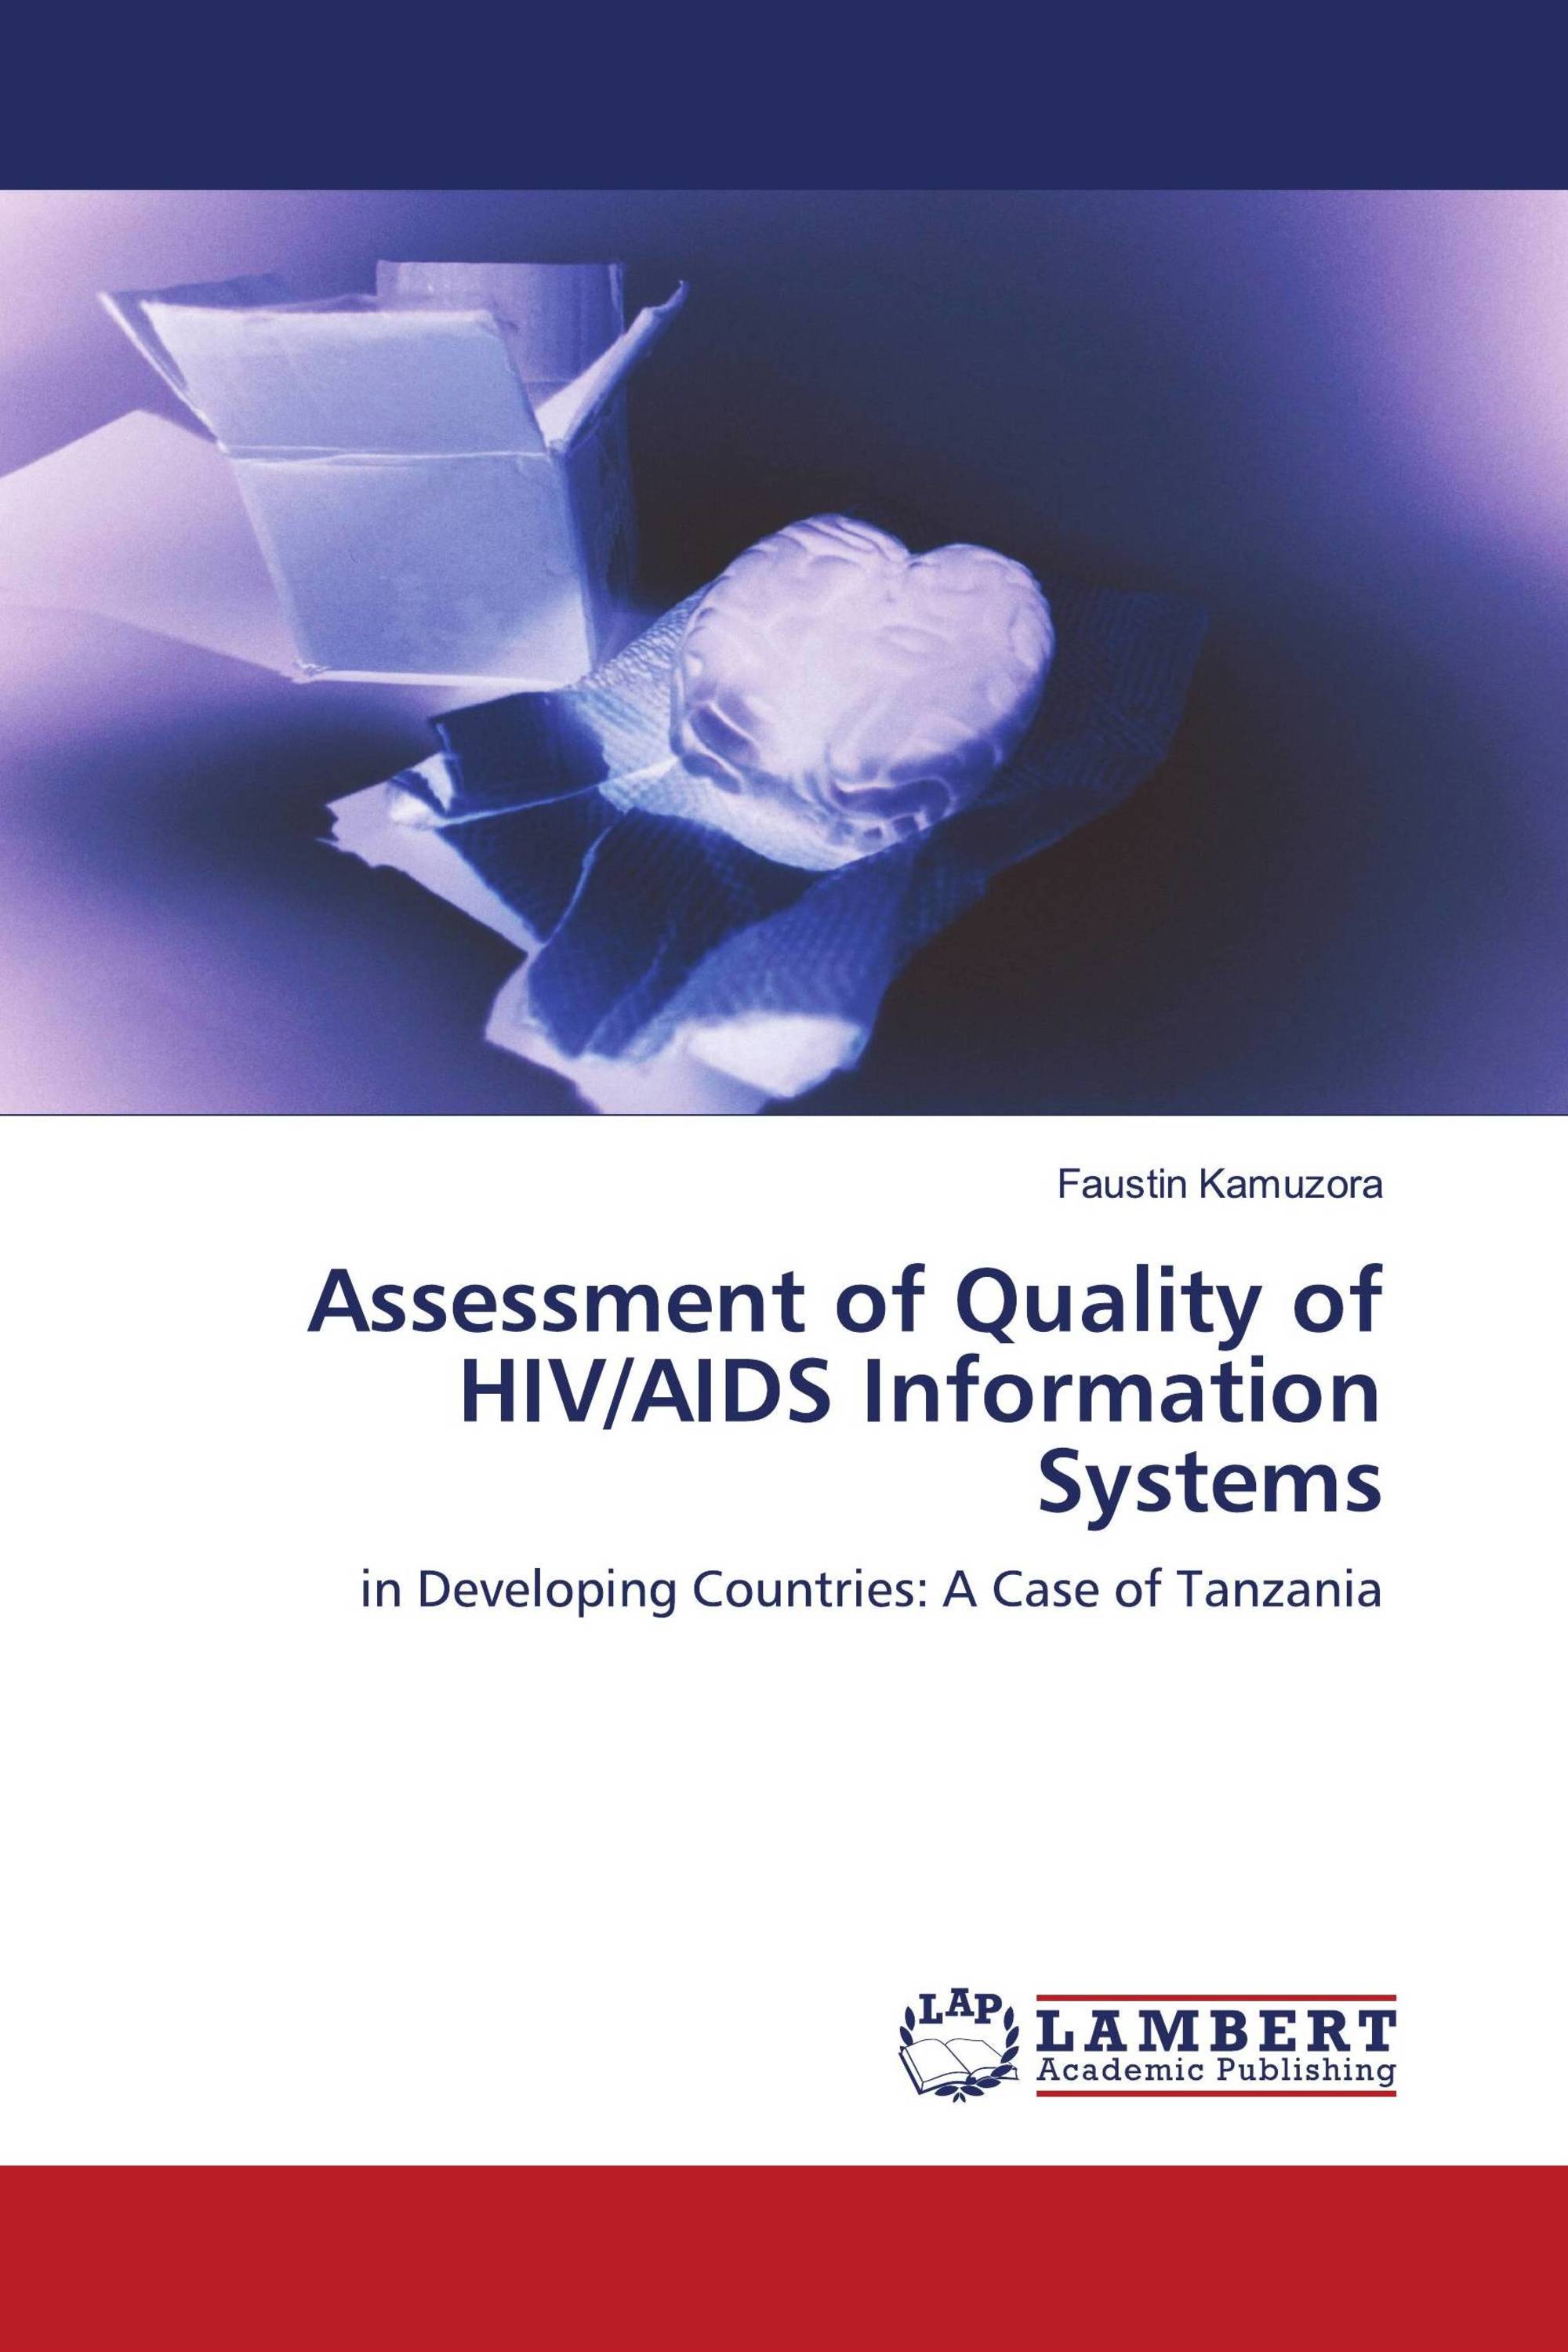 Assessment of Quality of HIV/AIDS Information Systems